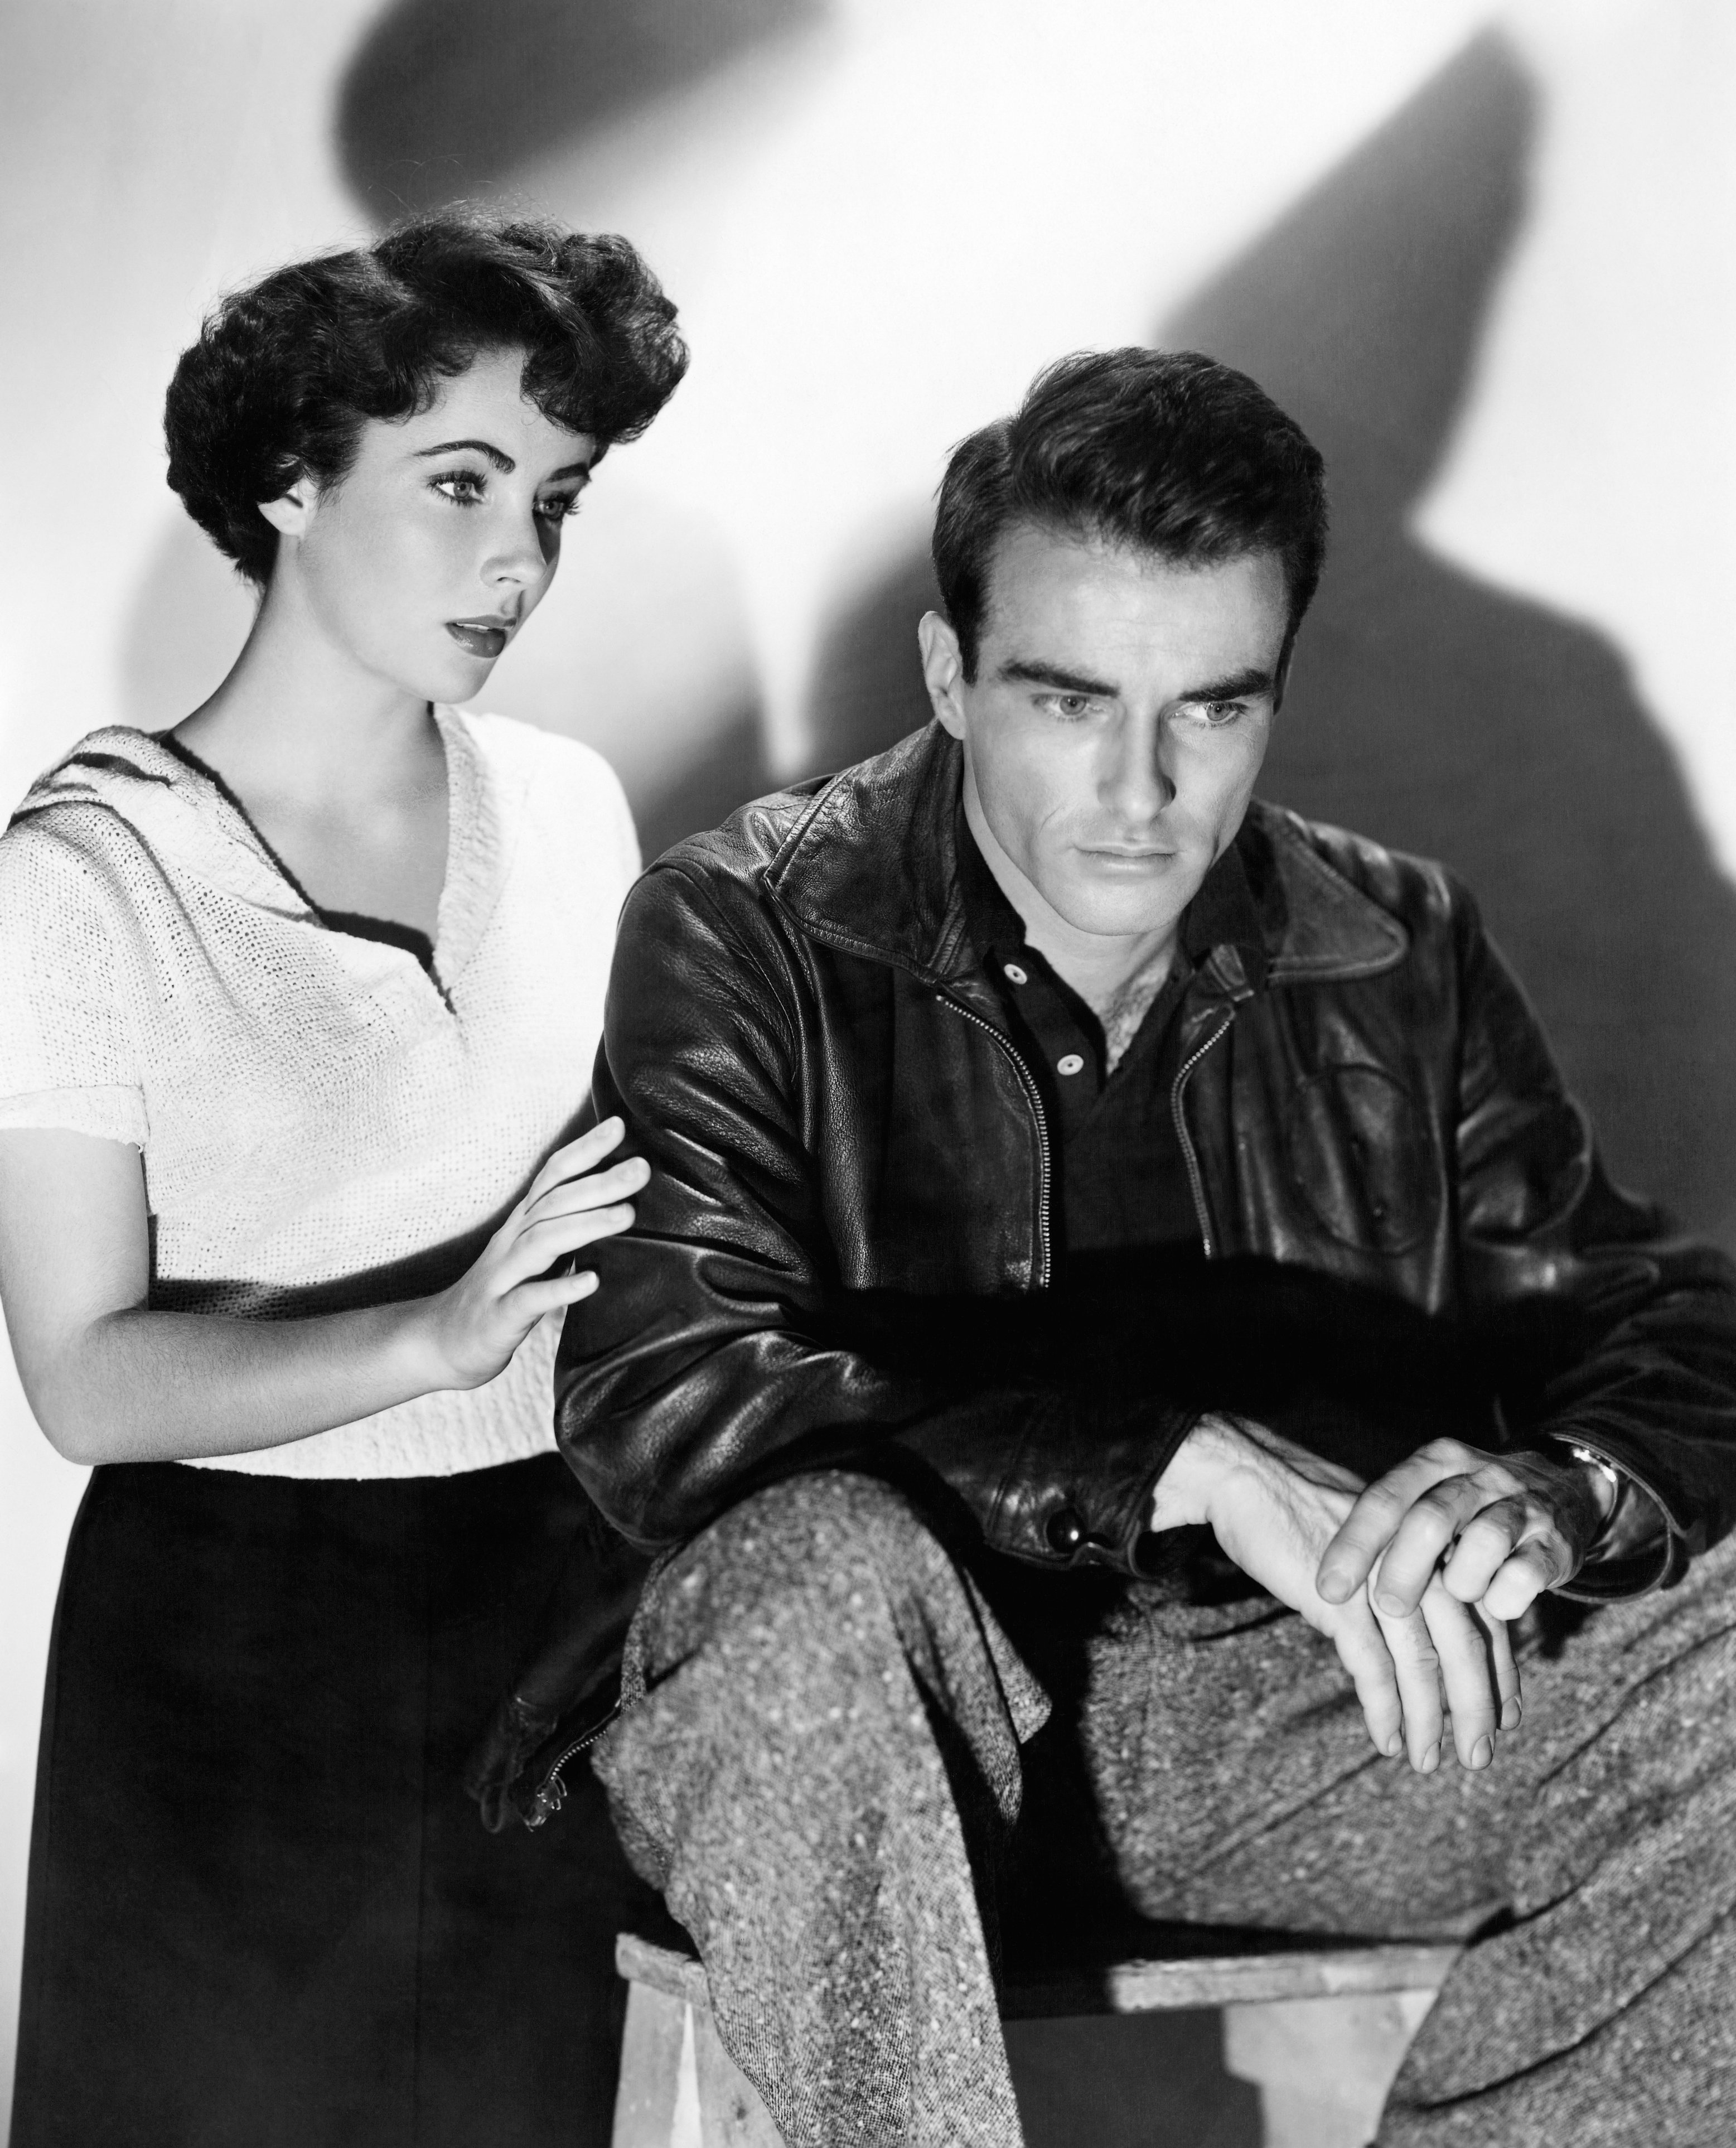 Elizabeth Taylor and Montgomery Clift's in the 1951 film "A Place in the Sun" | Photo: John Springer Collection/CORBIS/Corbis via Getty Images